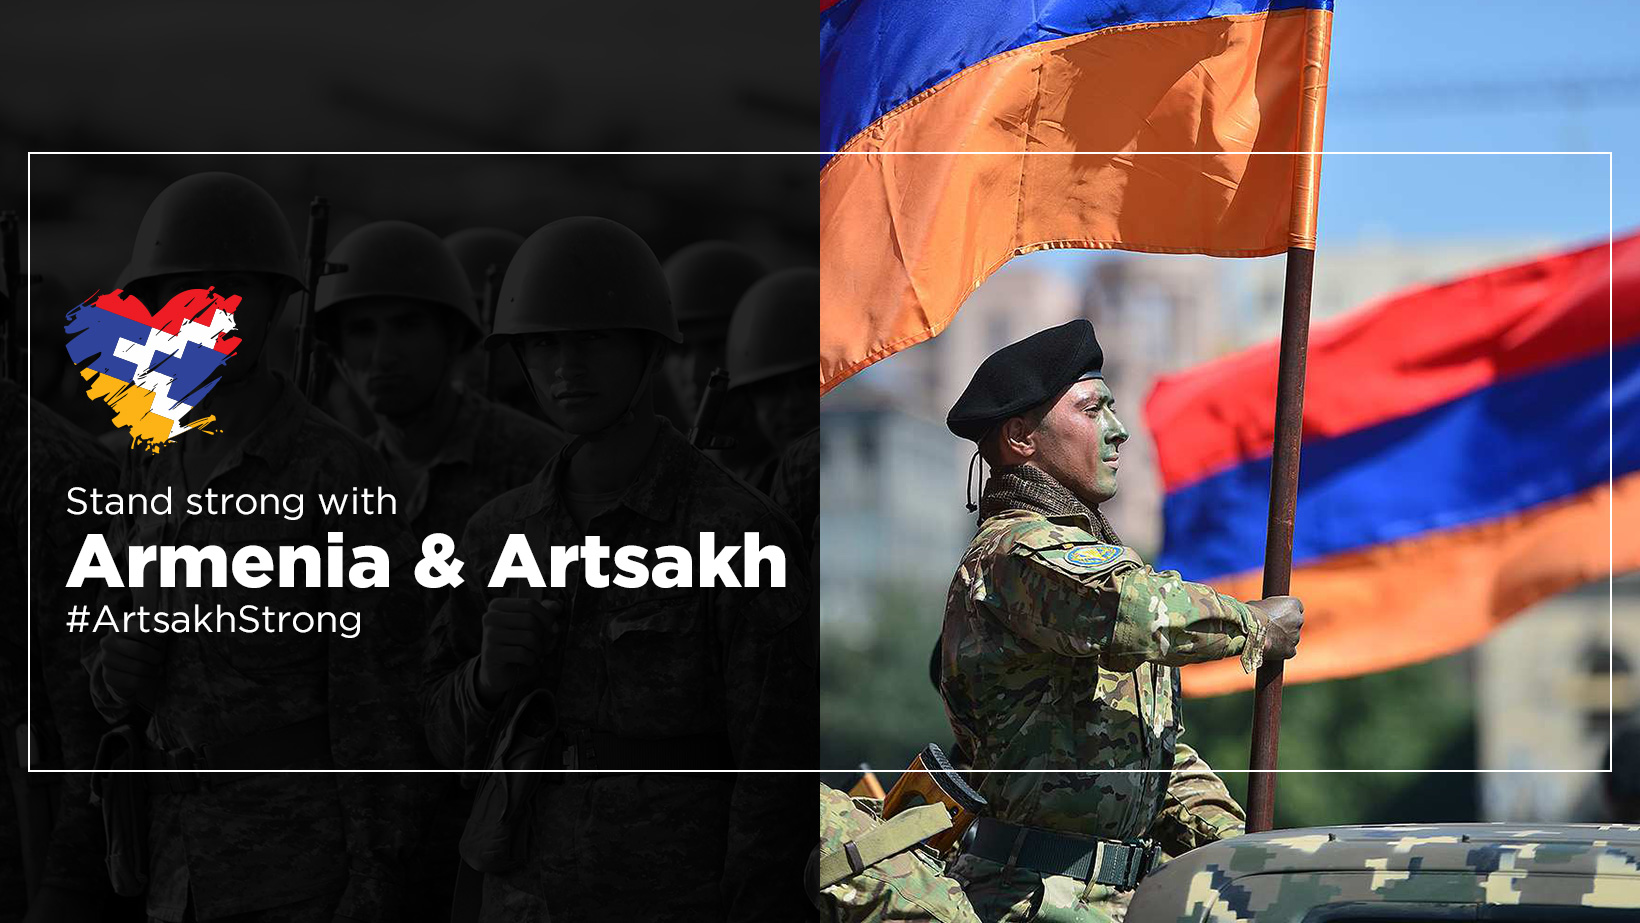 AGBU Montreal Aid for Artsakh